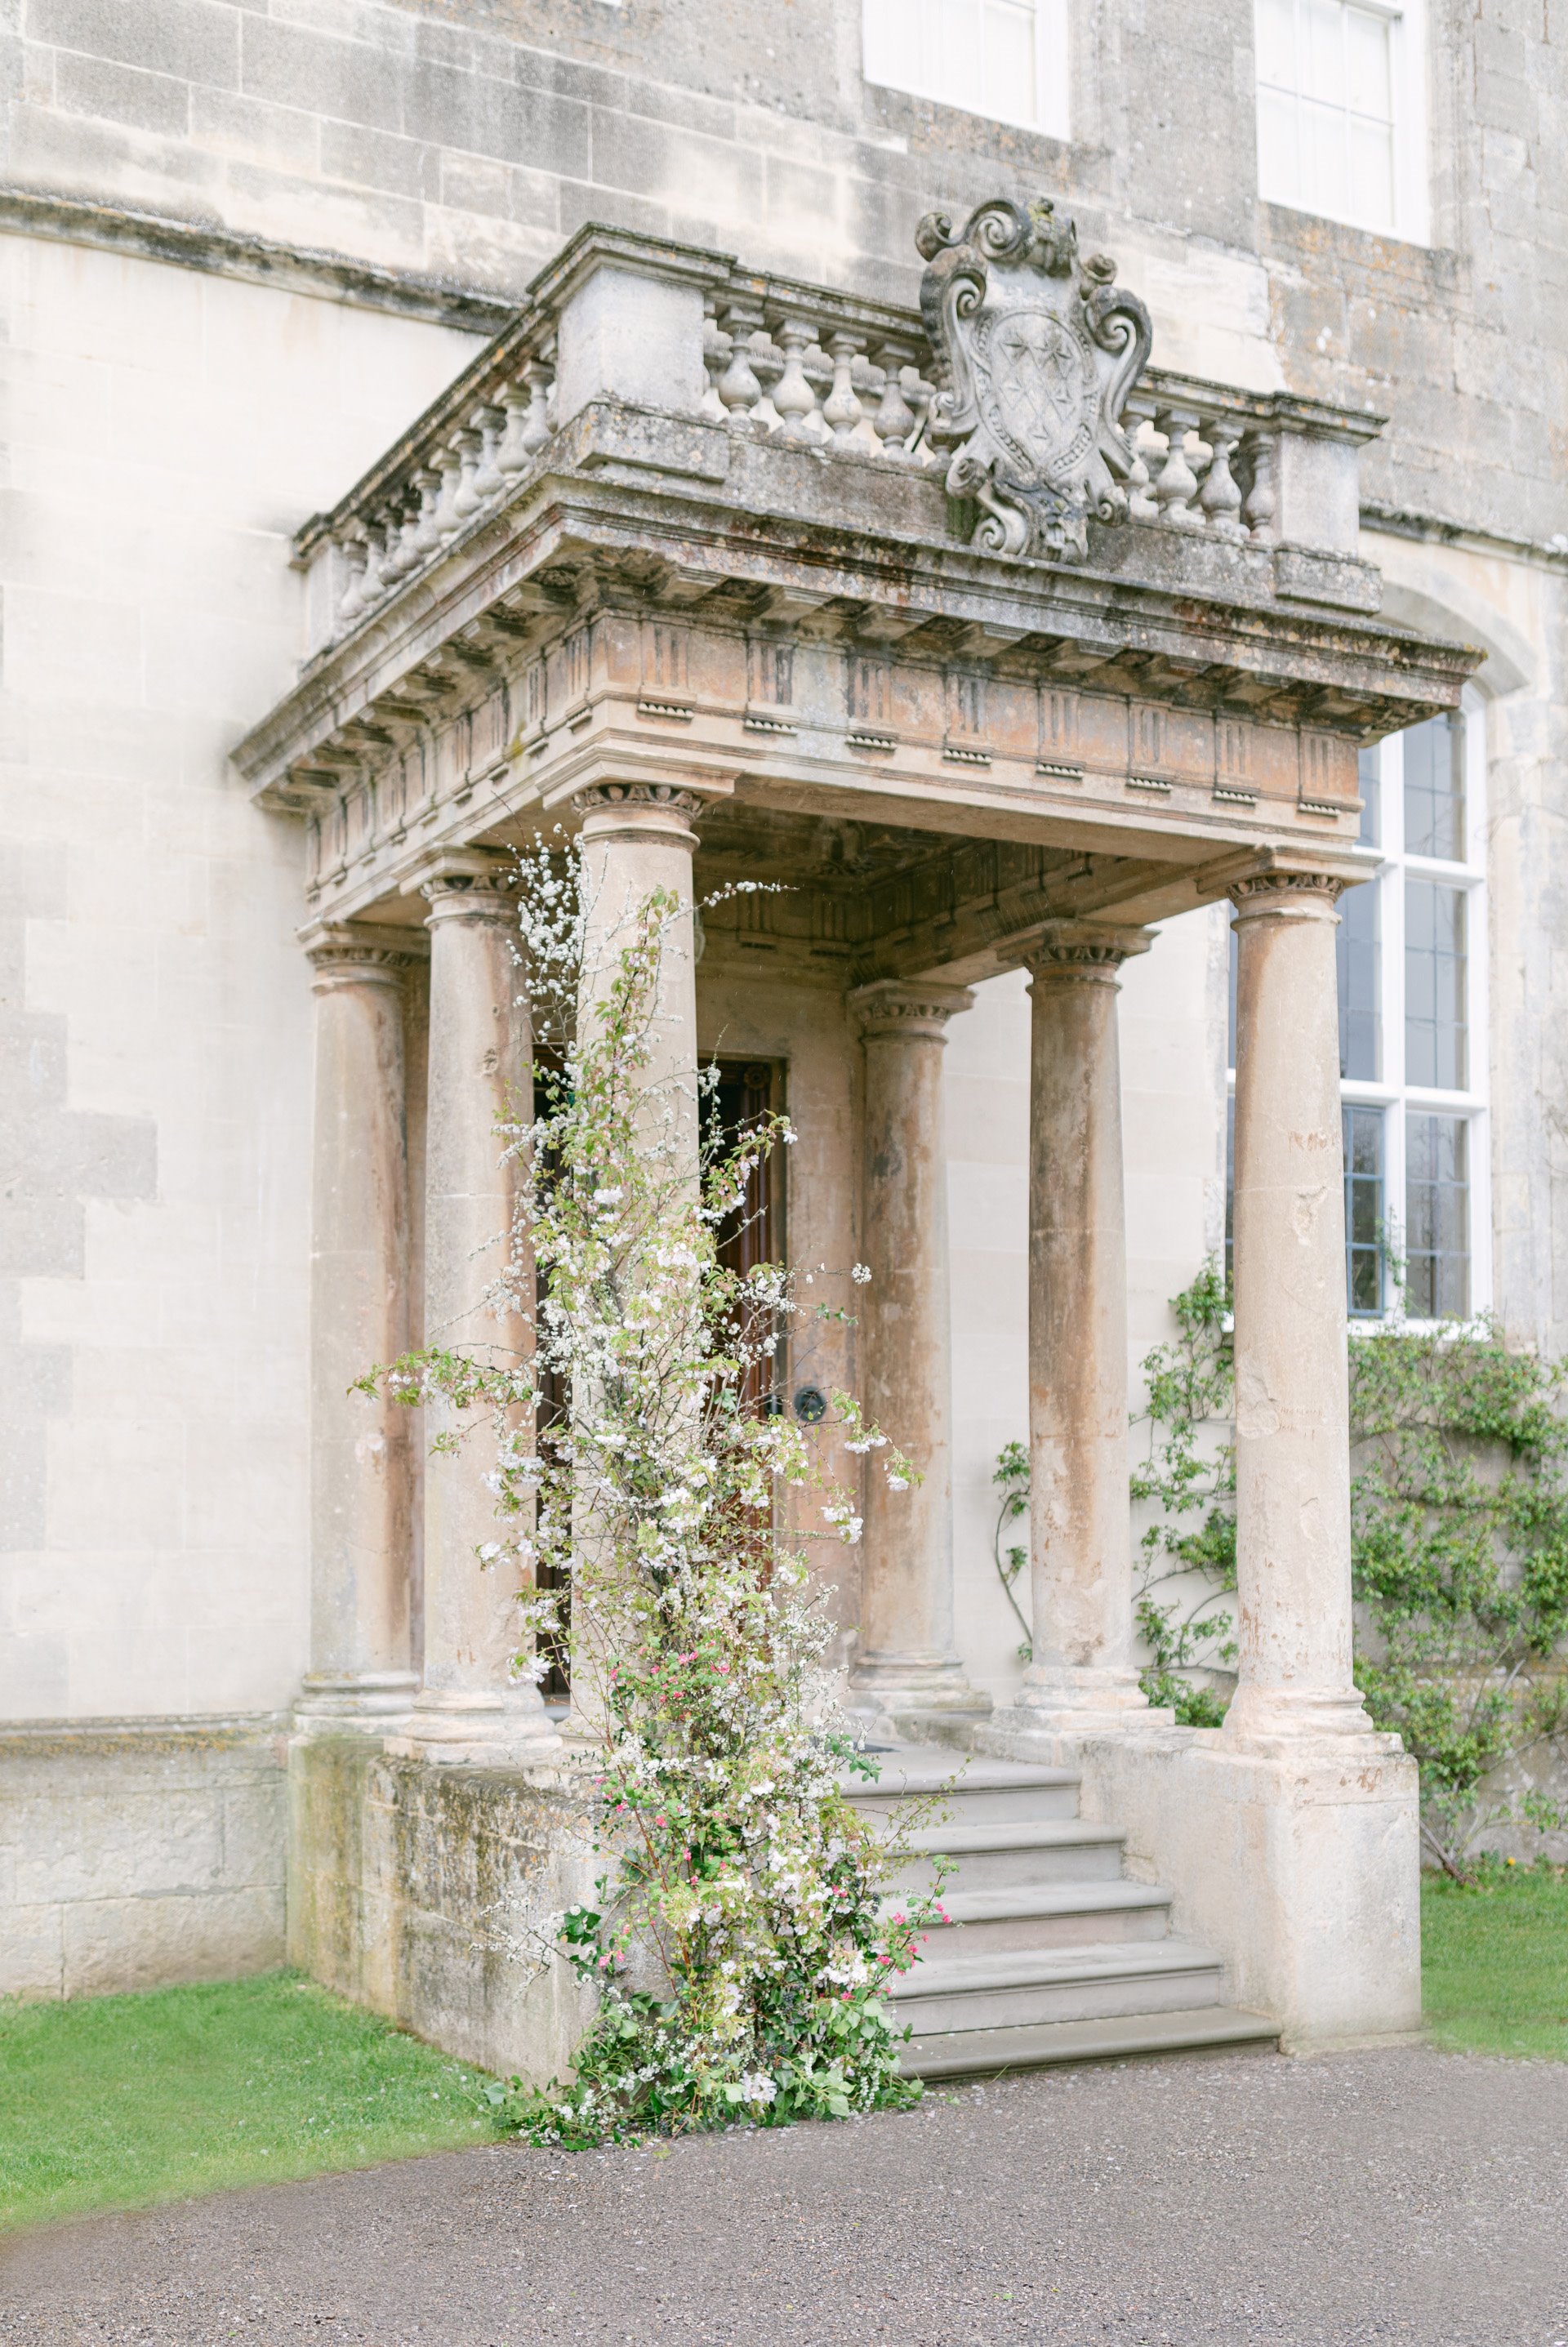 Front steps and columns of mansion house Elmore Court decorated in foliage for an open day wedding fair in September